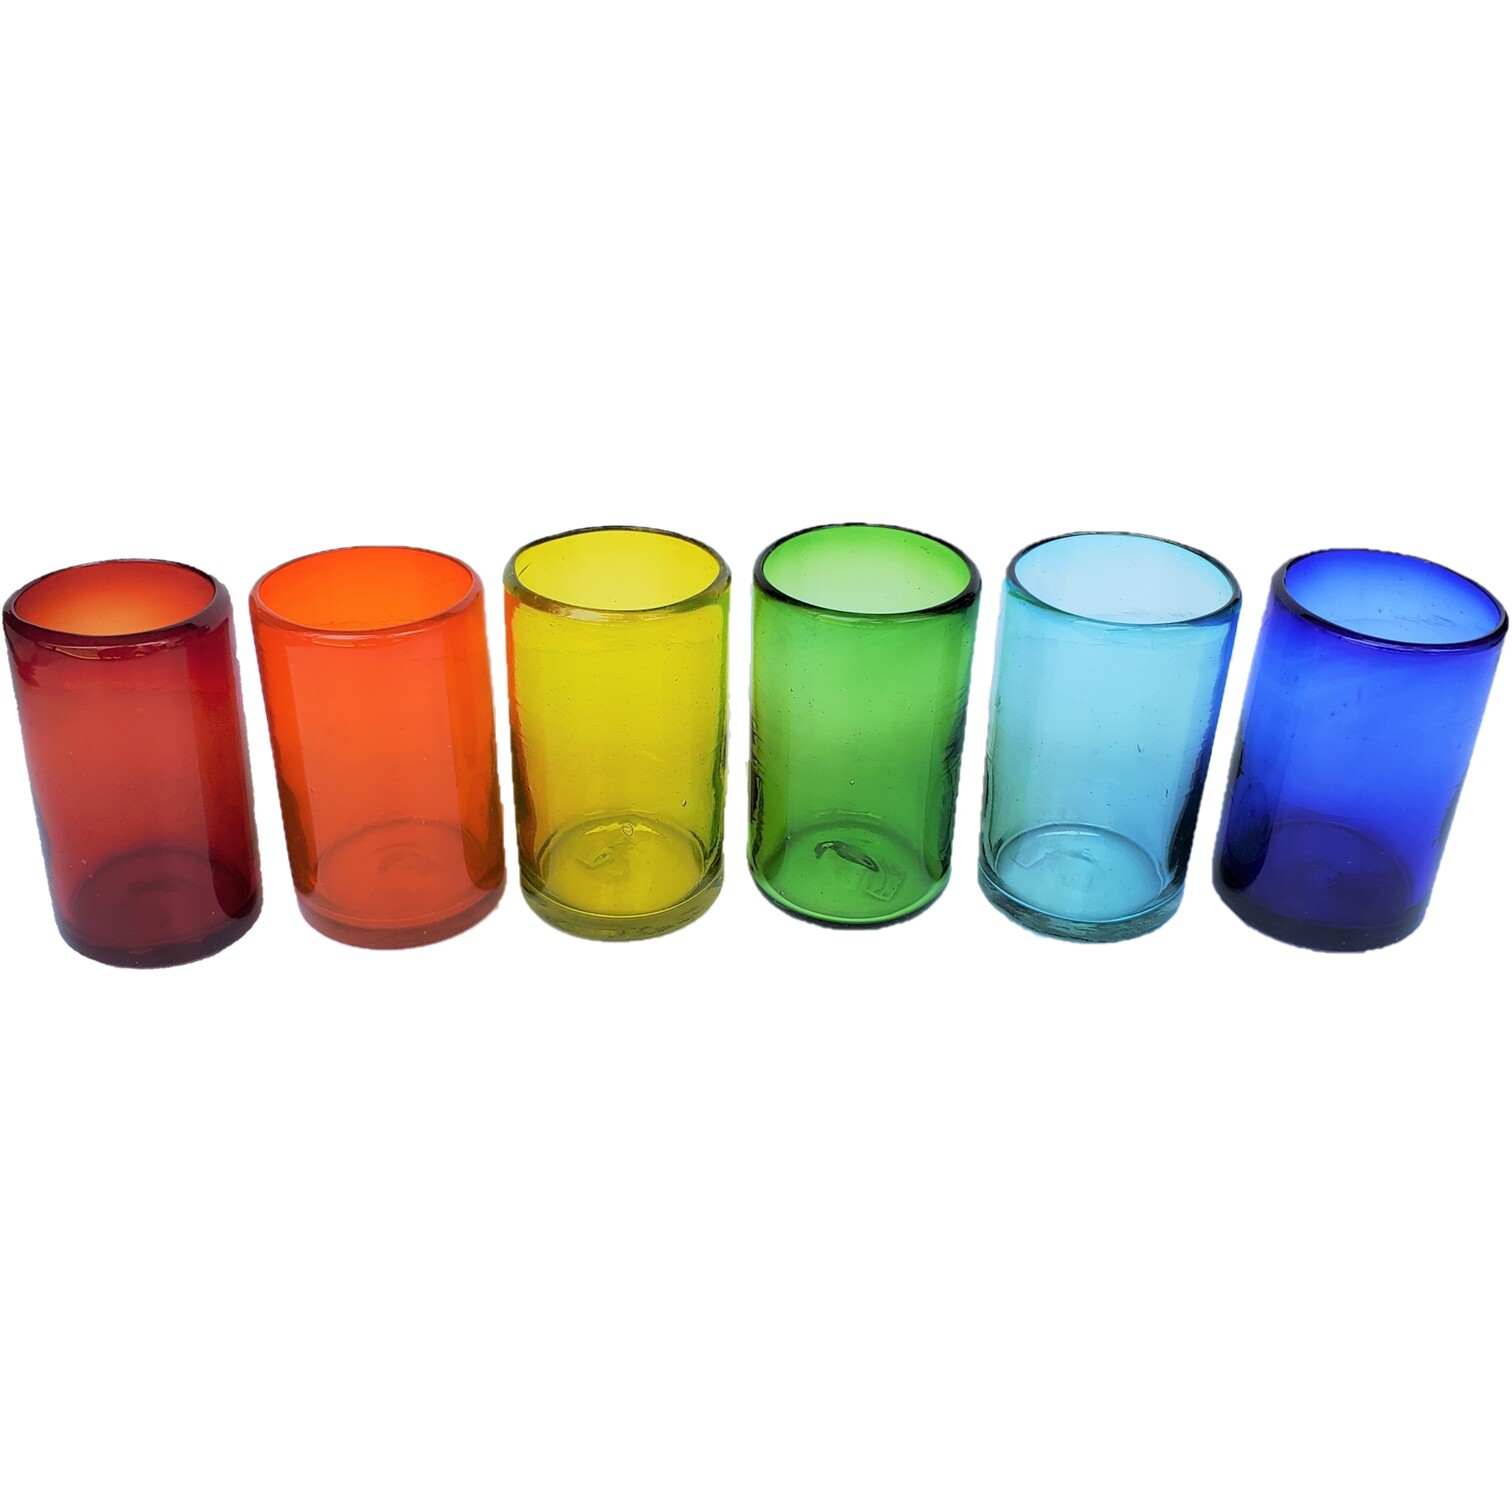 MEXICAN GLASSWARE / Rainbow Colored drinking glasses 